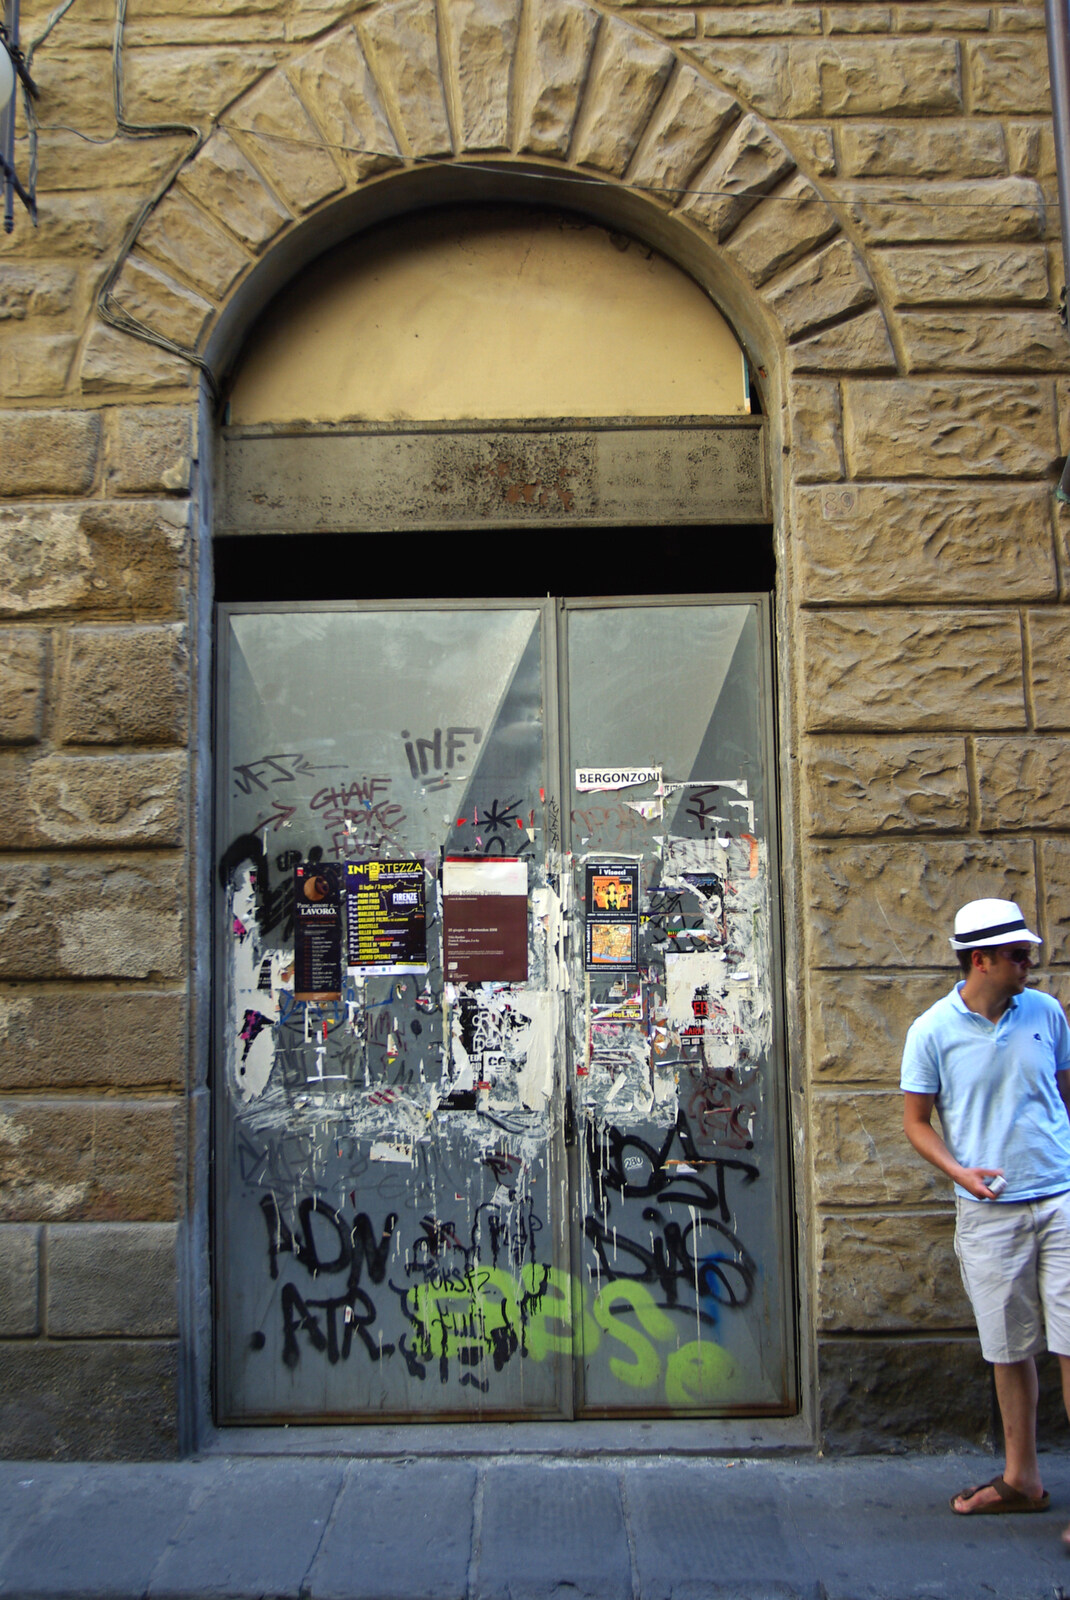 Pieter and a door-full of graffiti from A Day Trip to Firenze, Tuscany, Italy - 24th July 2008